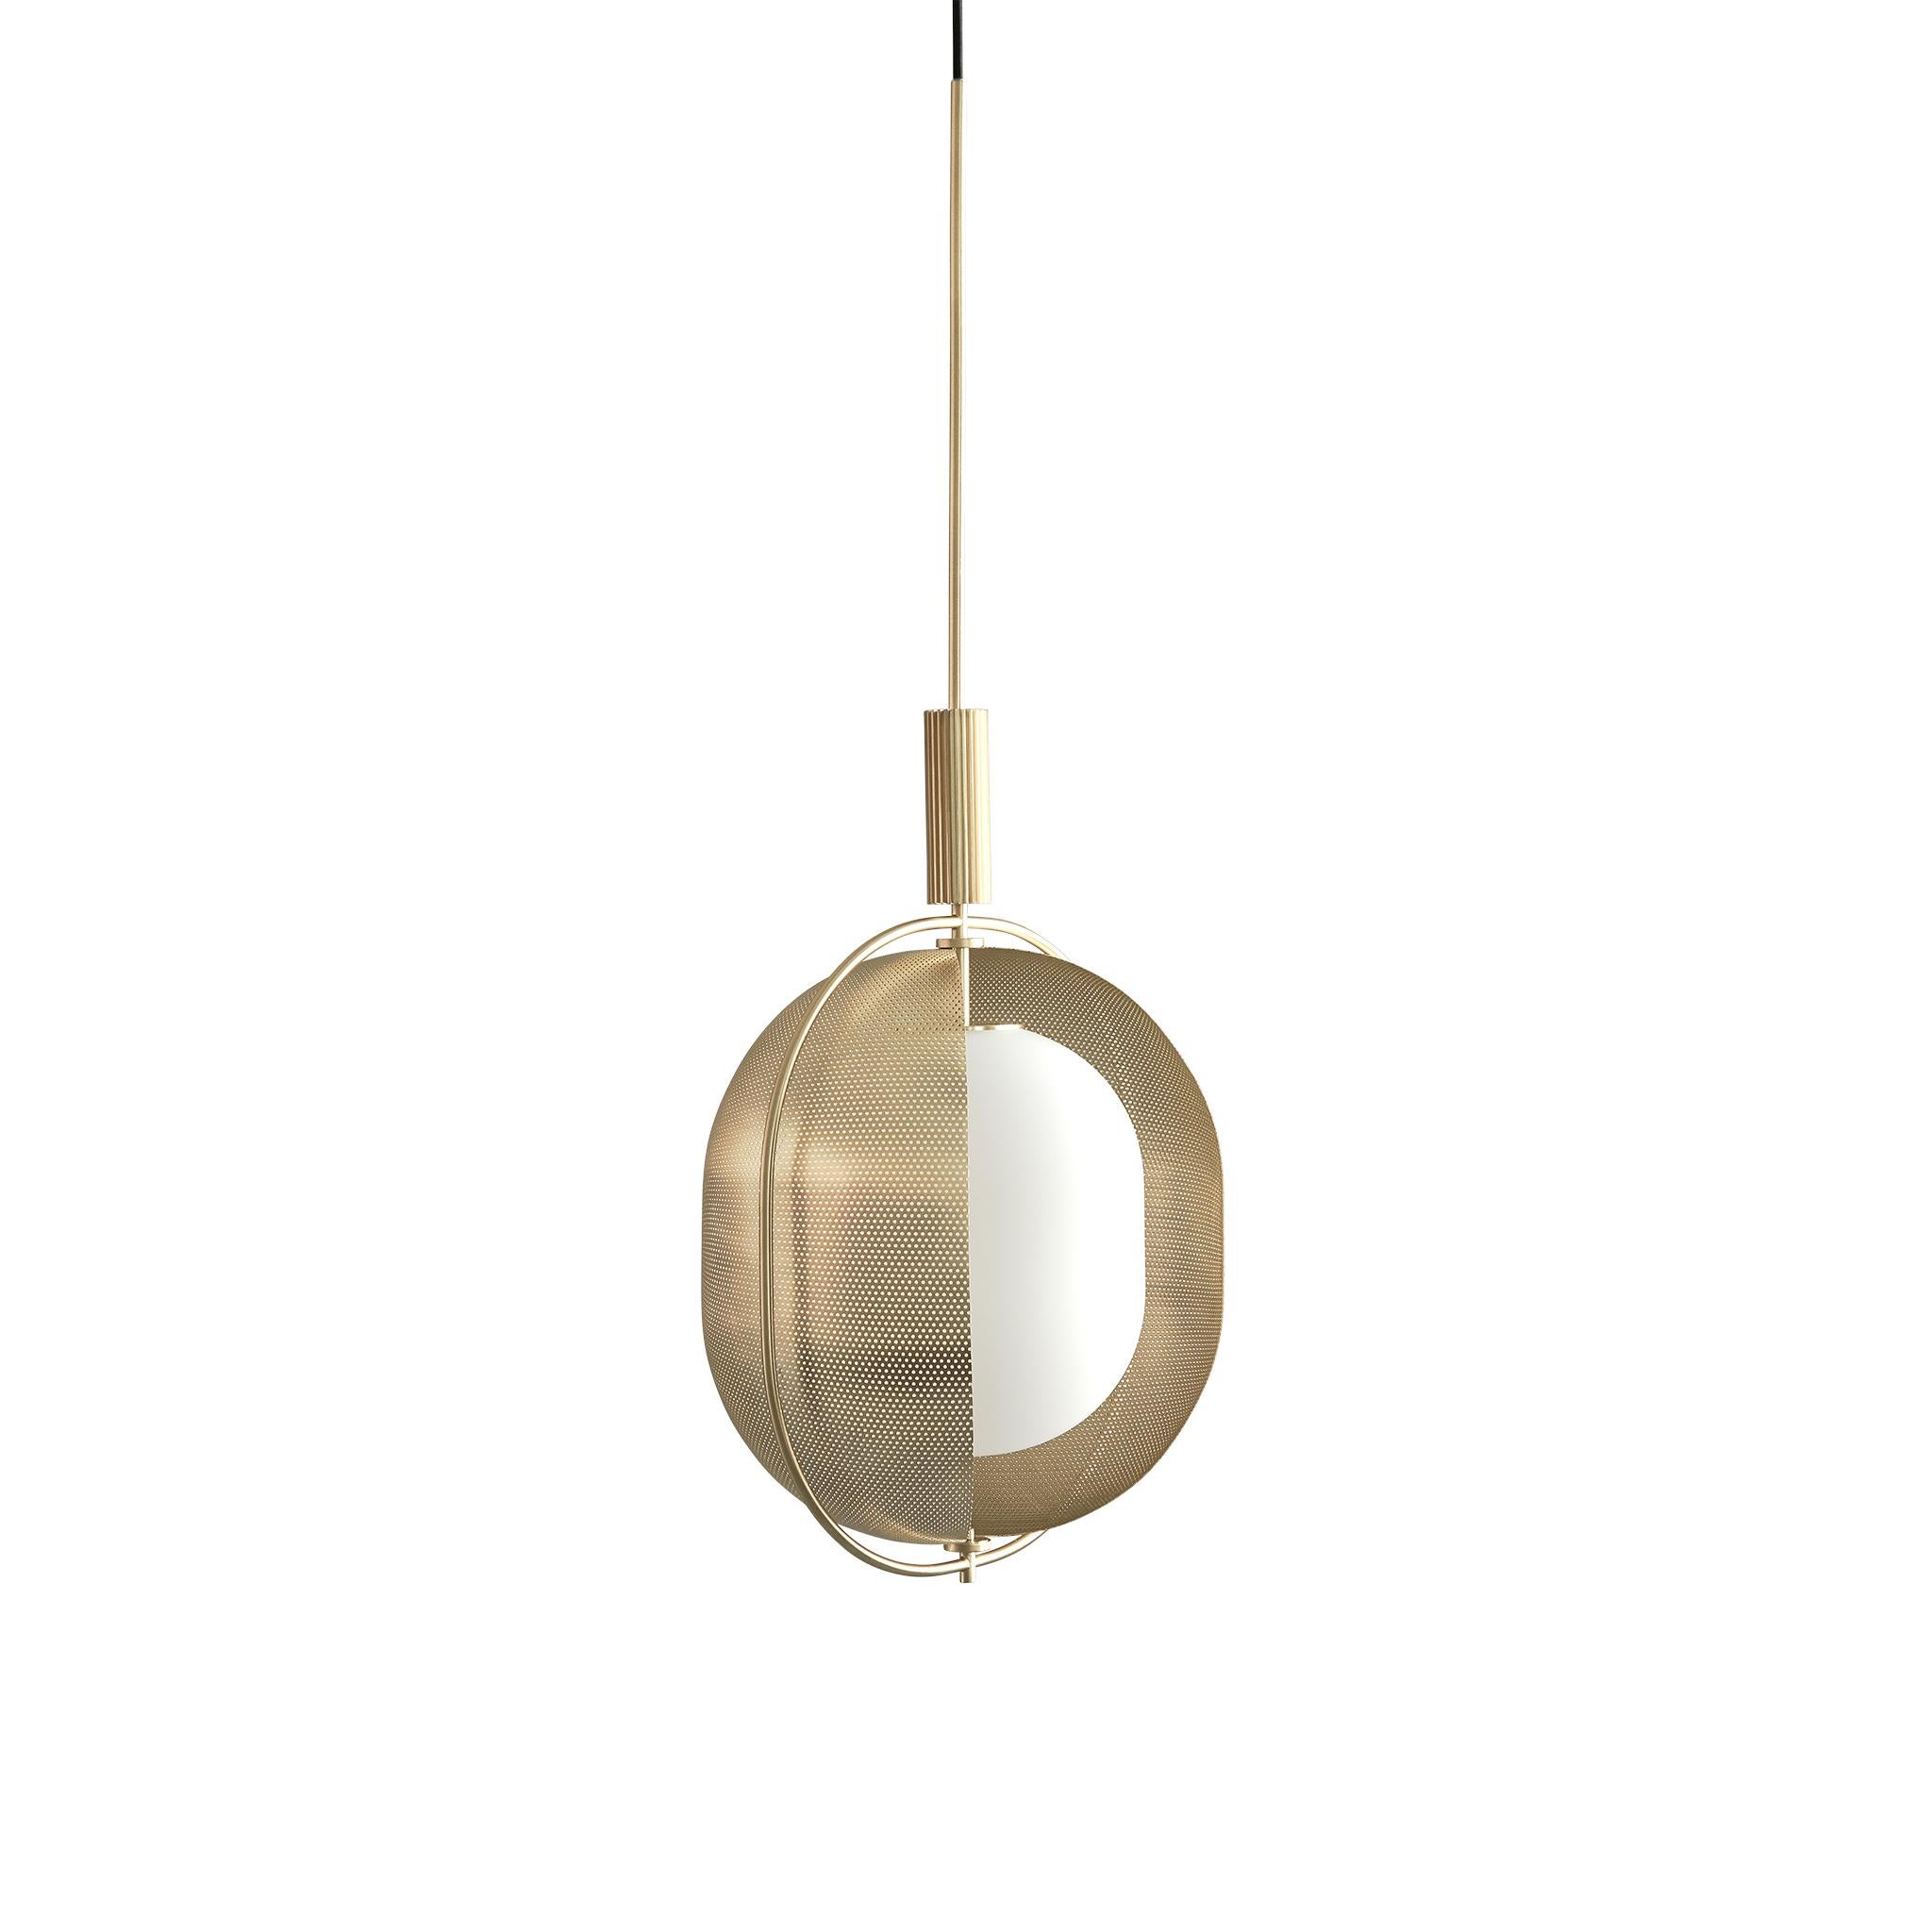 Pearl Pendant by 101 Copenhagen
Designed by Kristian Sofus Hansen & Tommy Hyldahl.
Dimensions: L 35 x W 35 x H 54,5 cm

Materials: All metal parts incl. frame, lampshade, ceiling cup, screws etc. are made of 100% iron. All visible components